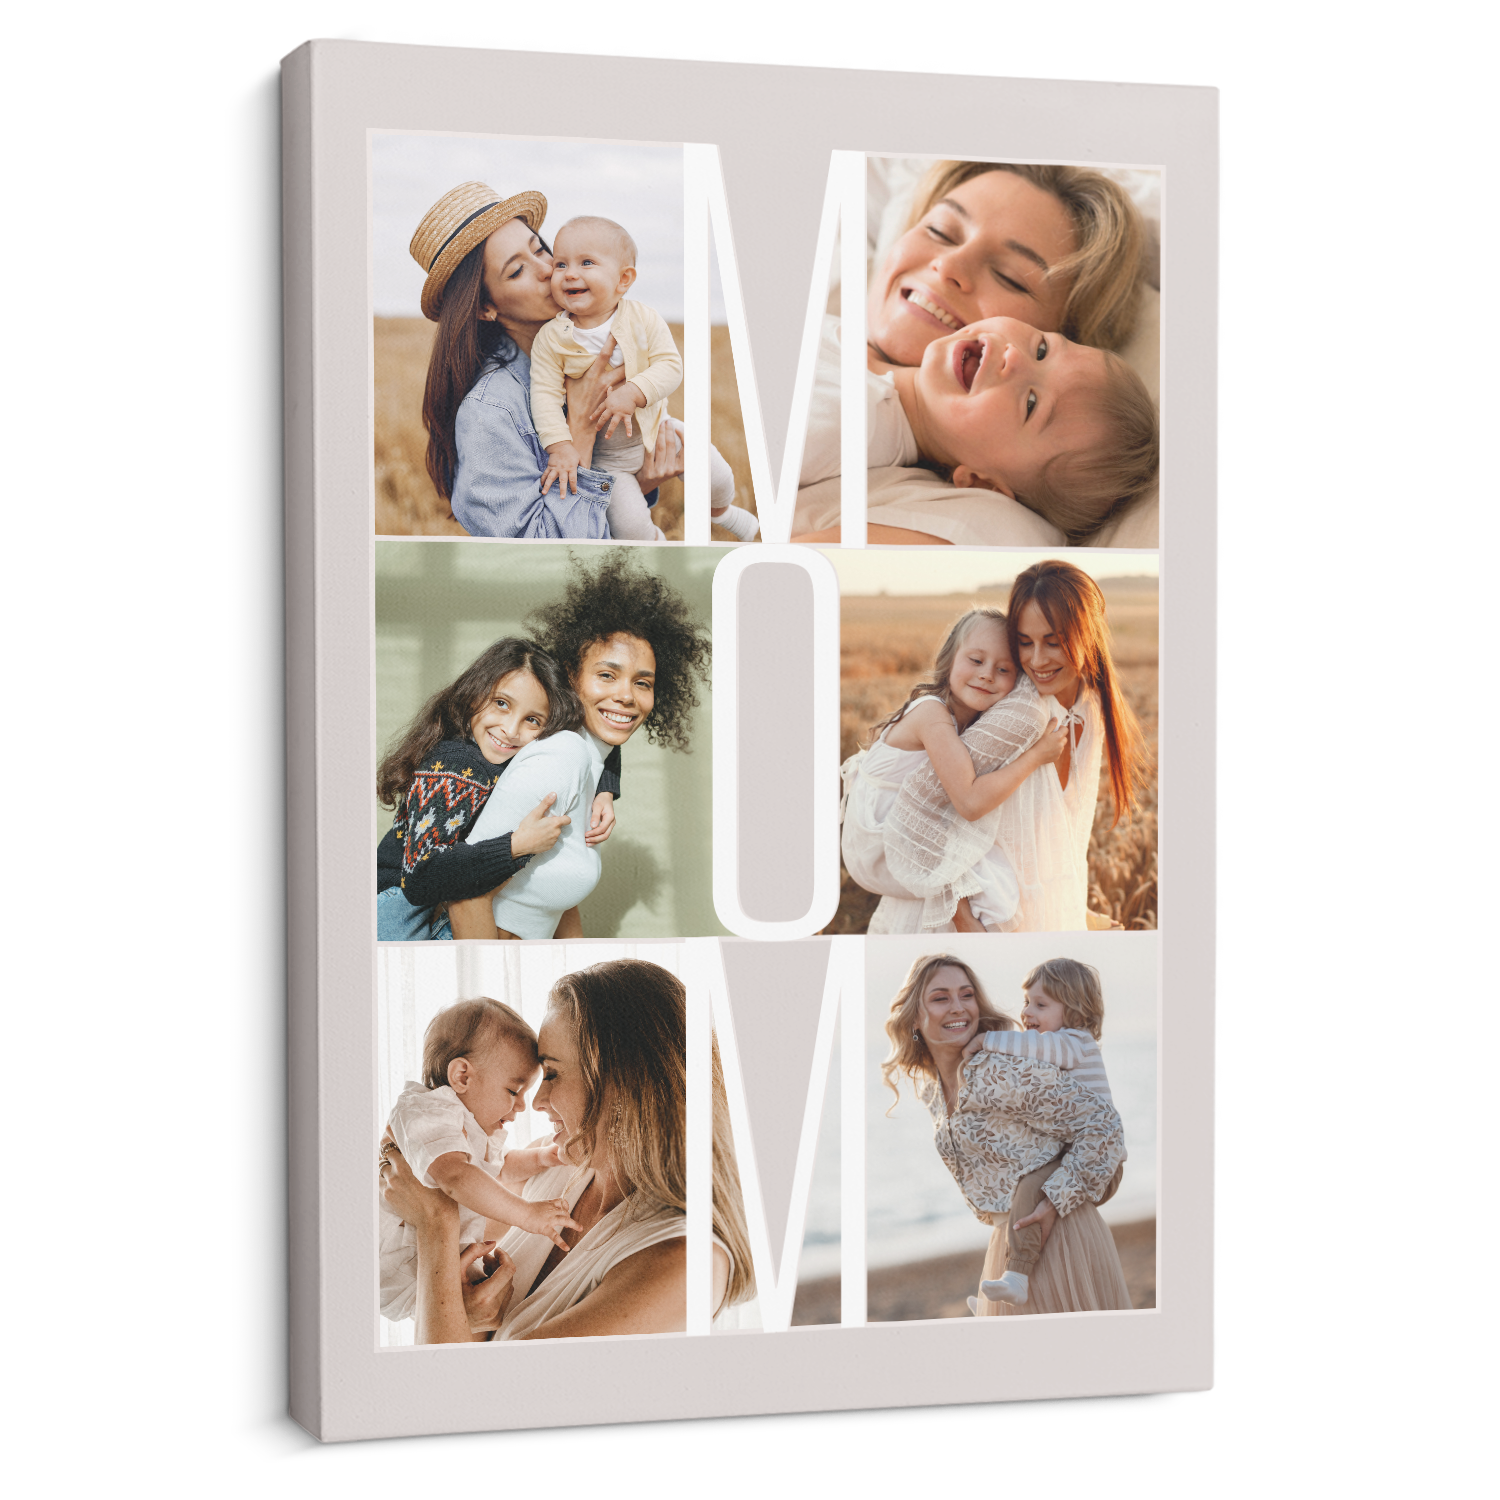 Mom Photo Collage Canvas Wall Art Custom 6 Pictures